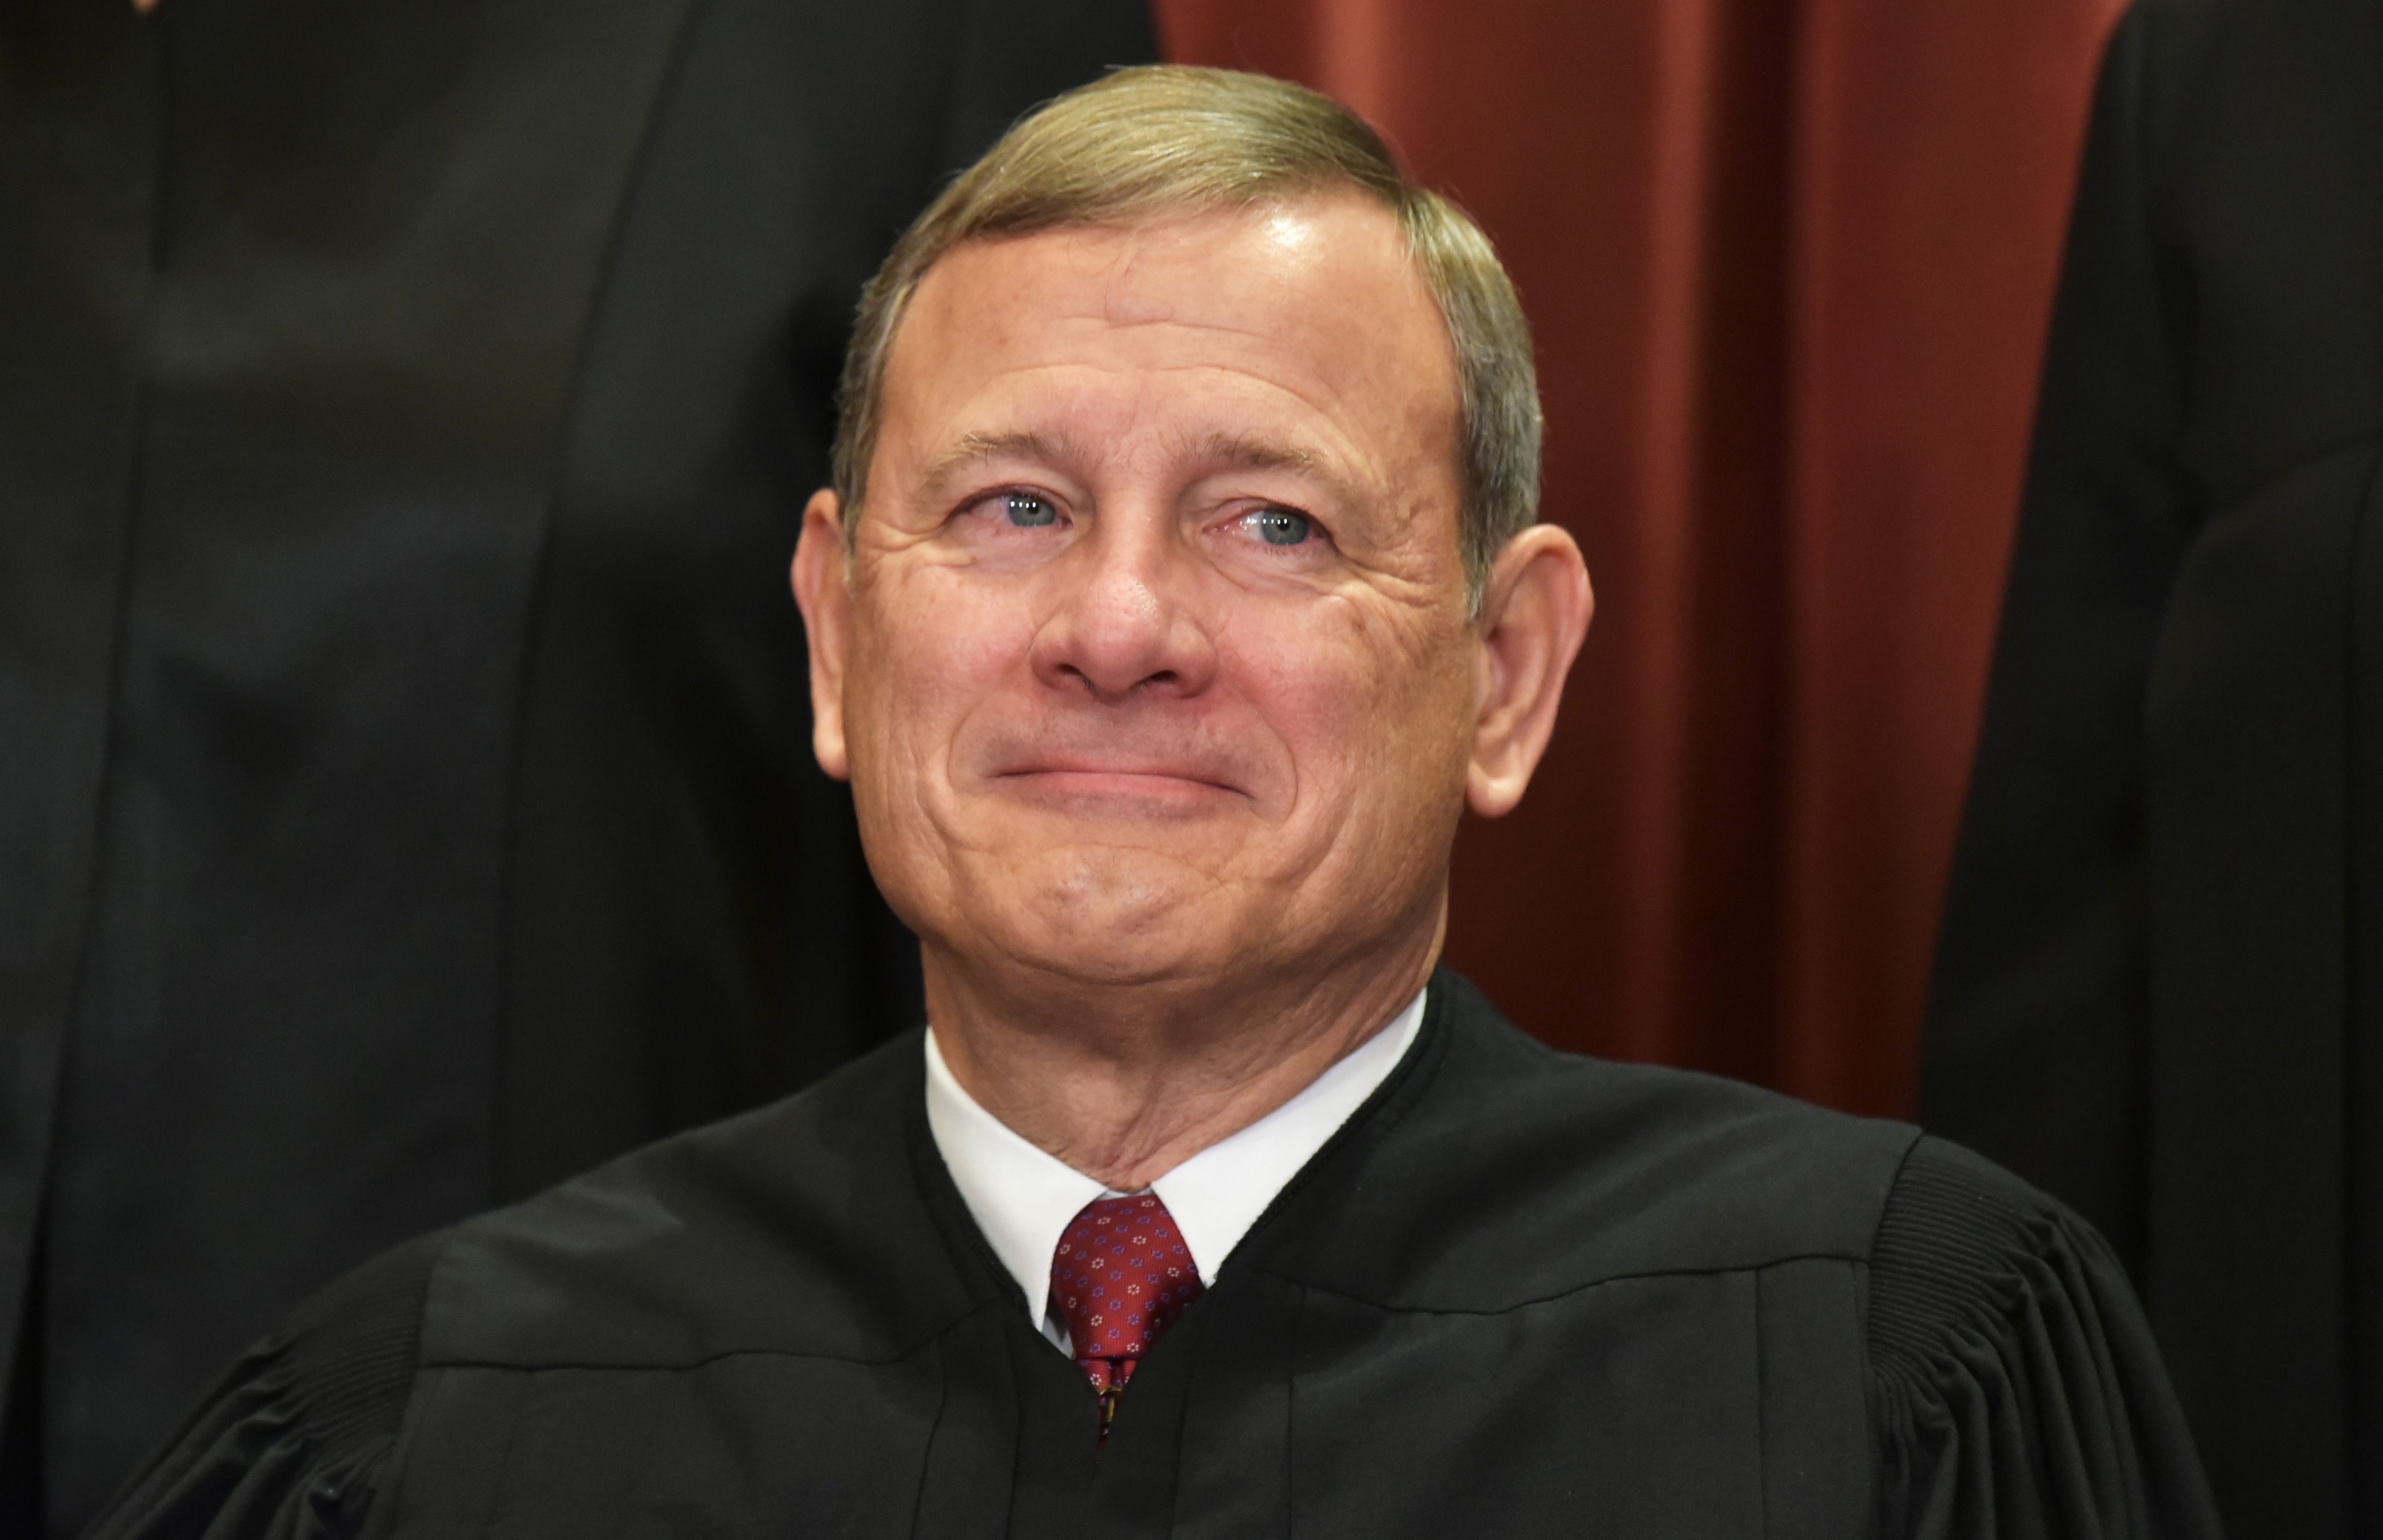 Chief Justice John Roberts poses for an official group photo at the US Supreme Court on November 30, 2018. (Mandel Ngan/AFP/Getty Images)